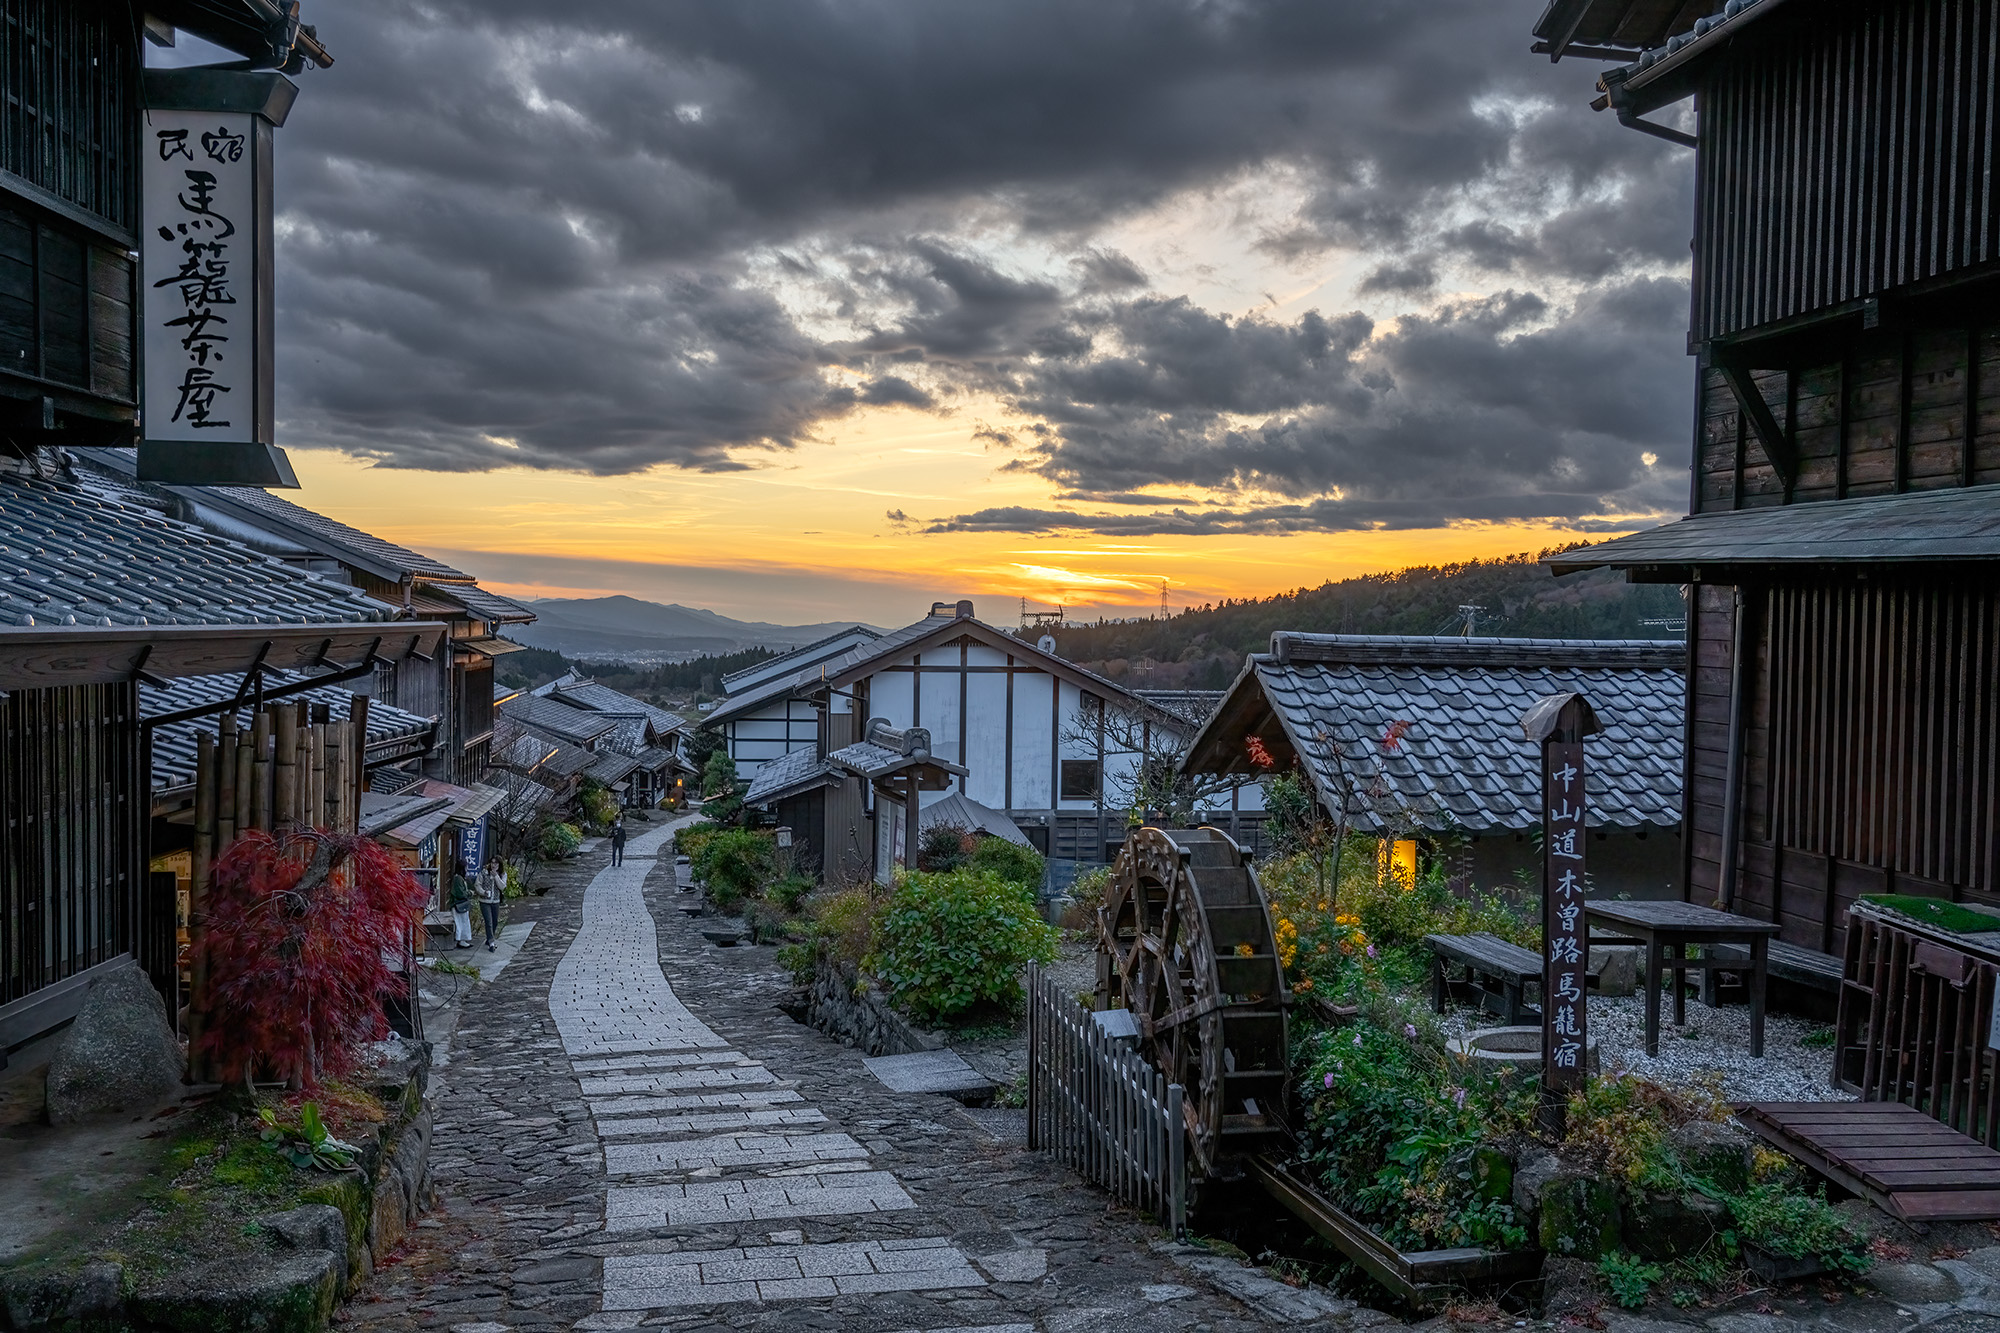 Path to Sunset Dreams" captures the captivating scene in Magome, Japan. The path, flanked by traditional buildings, stretches...